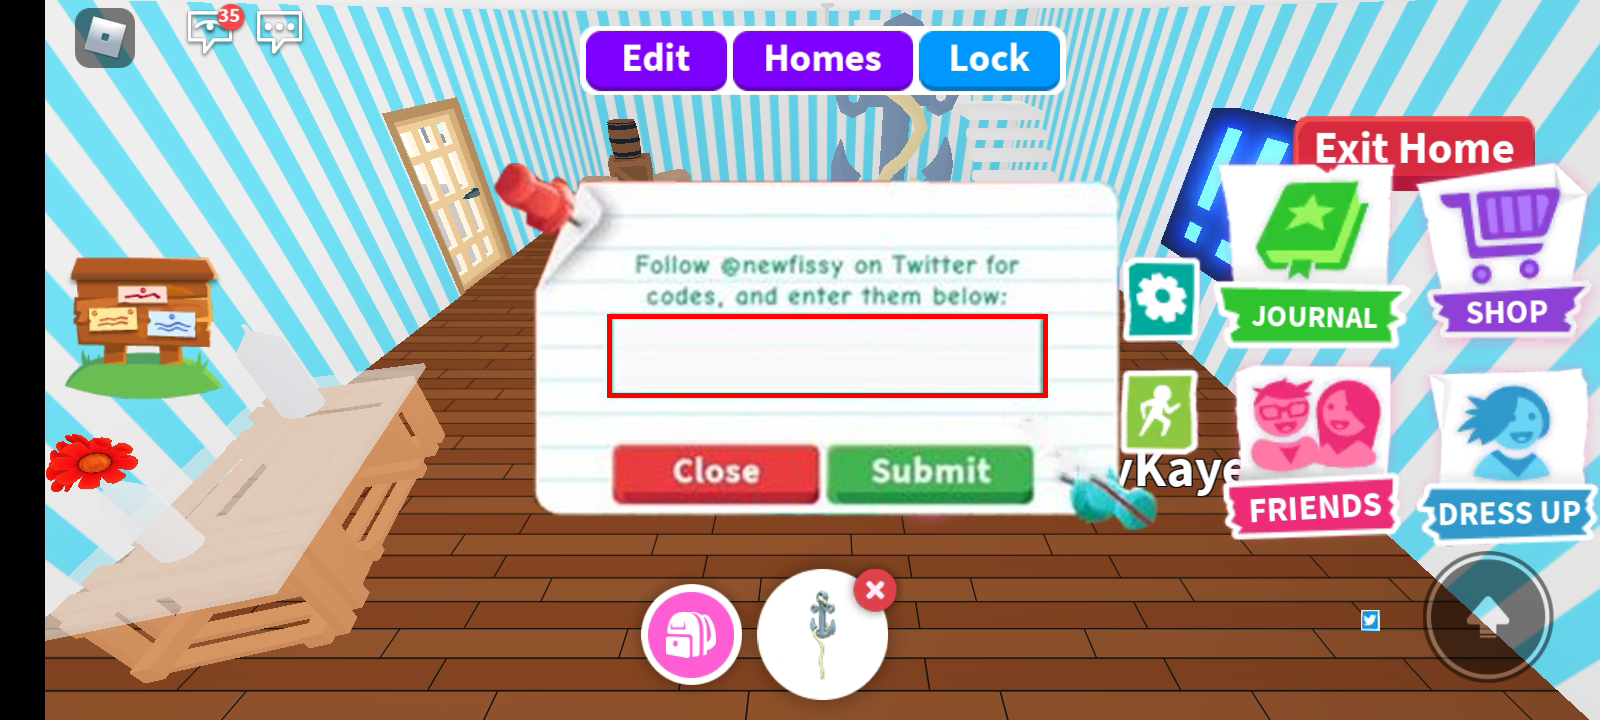 How To Remove Your Name and Your Pet's Name In Adopt Me! 